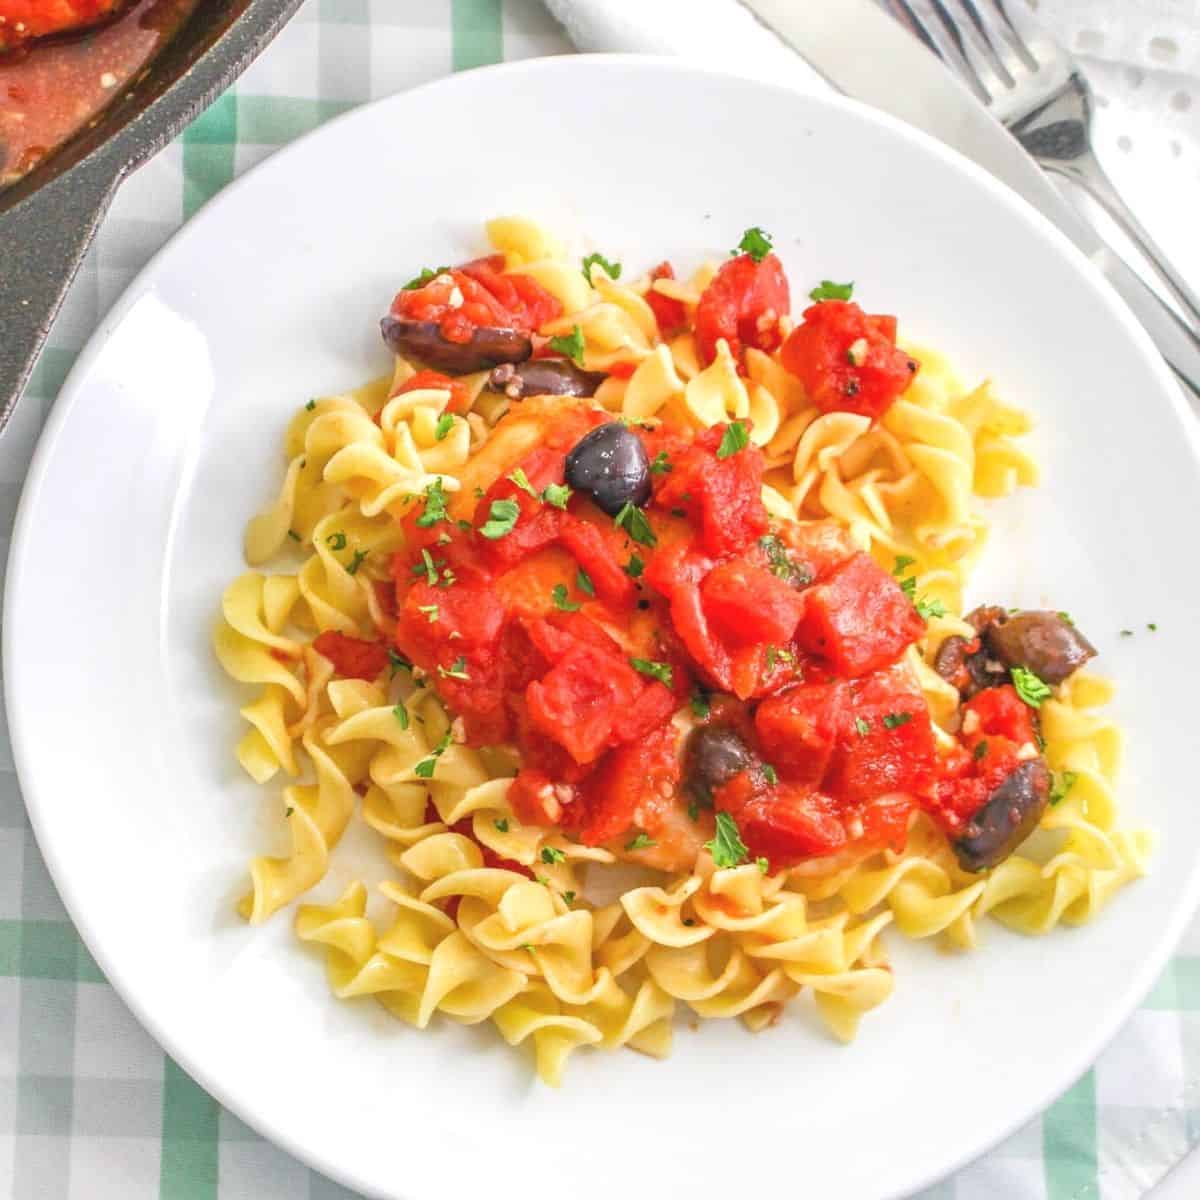 Mediterranean Diet Chicken Breast Provencal, a healthier recipe version inspired by the southern French chicken with tomatoes and olives.